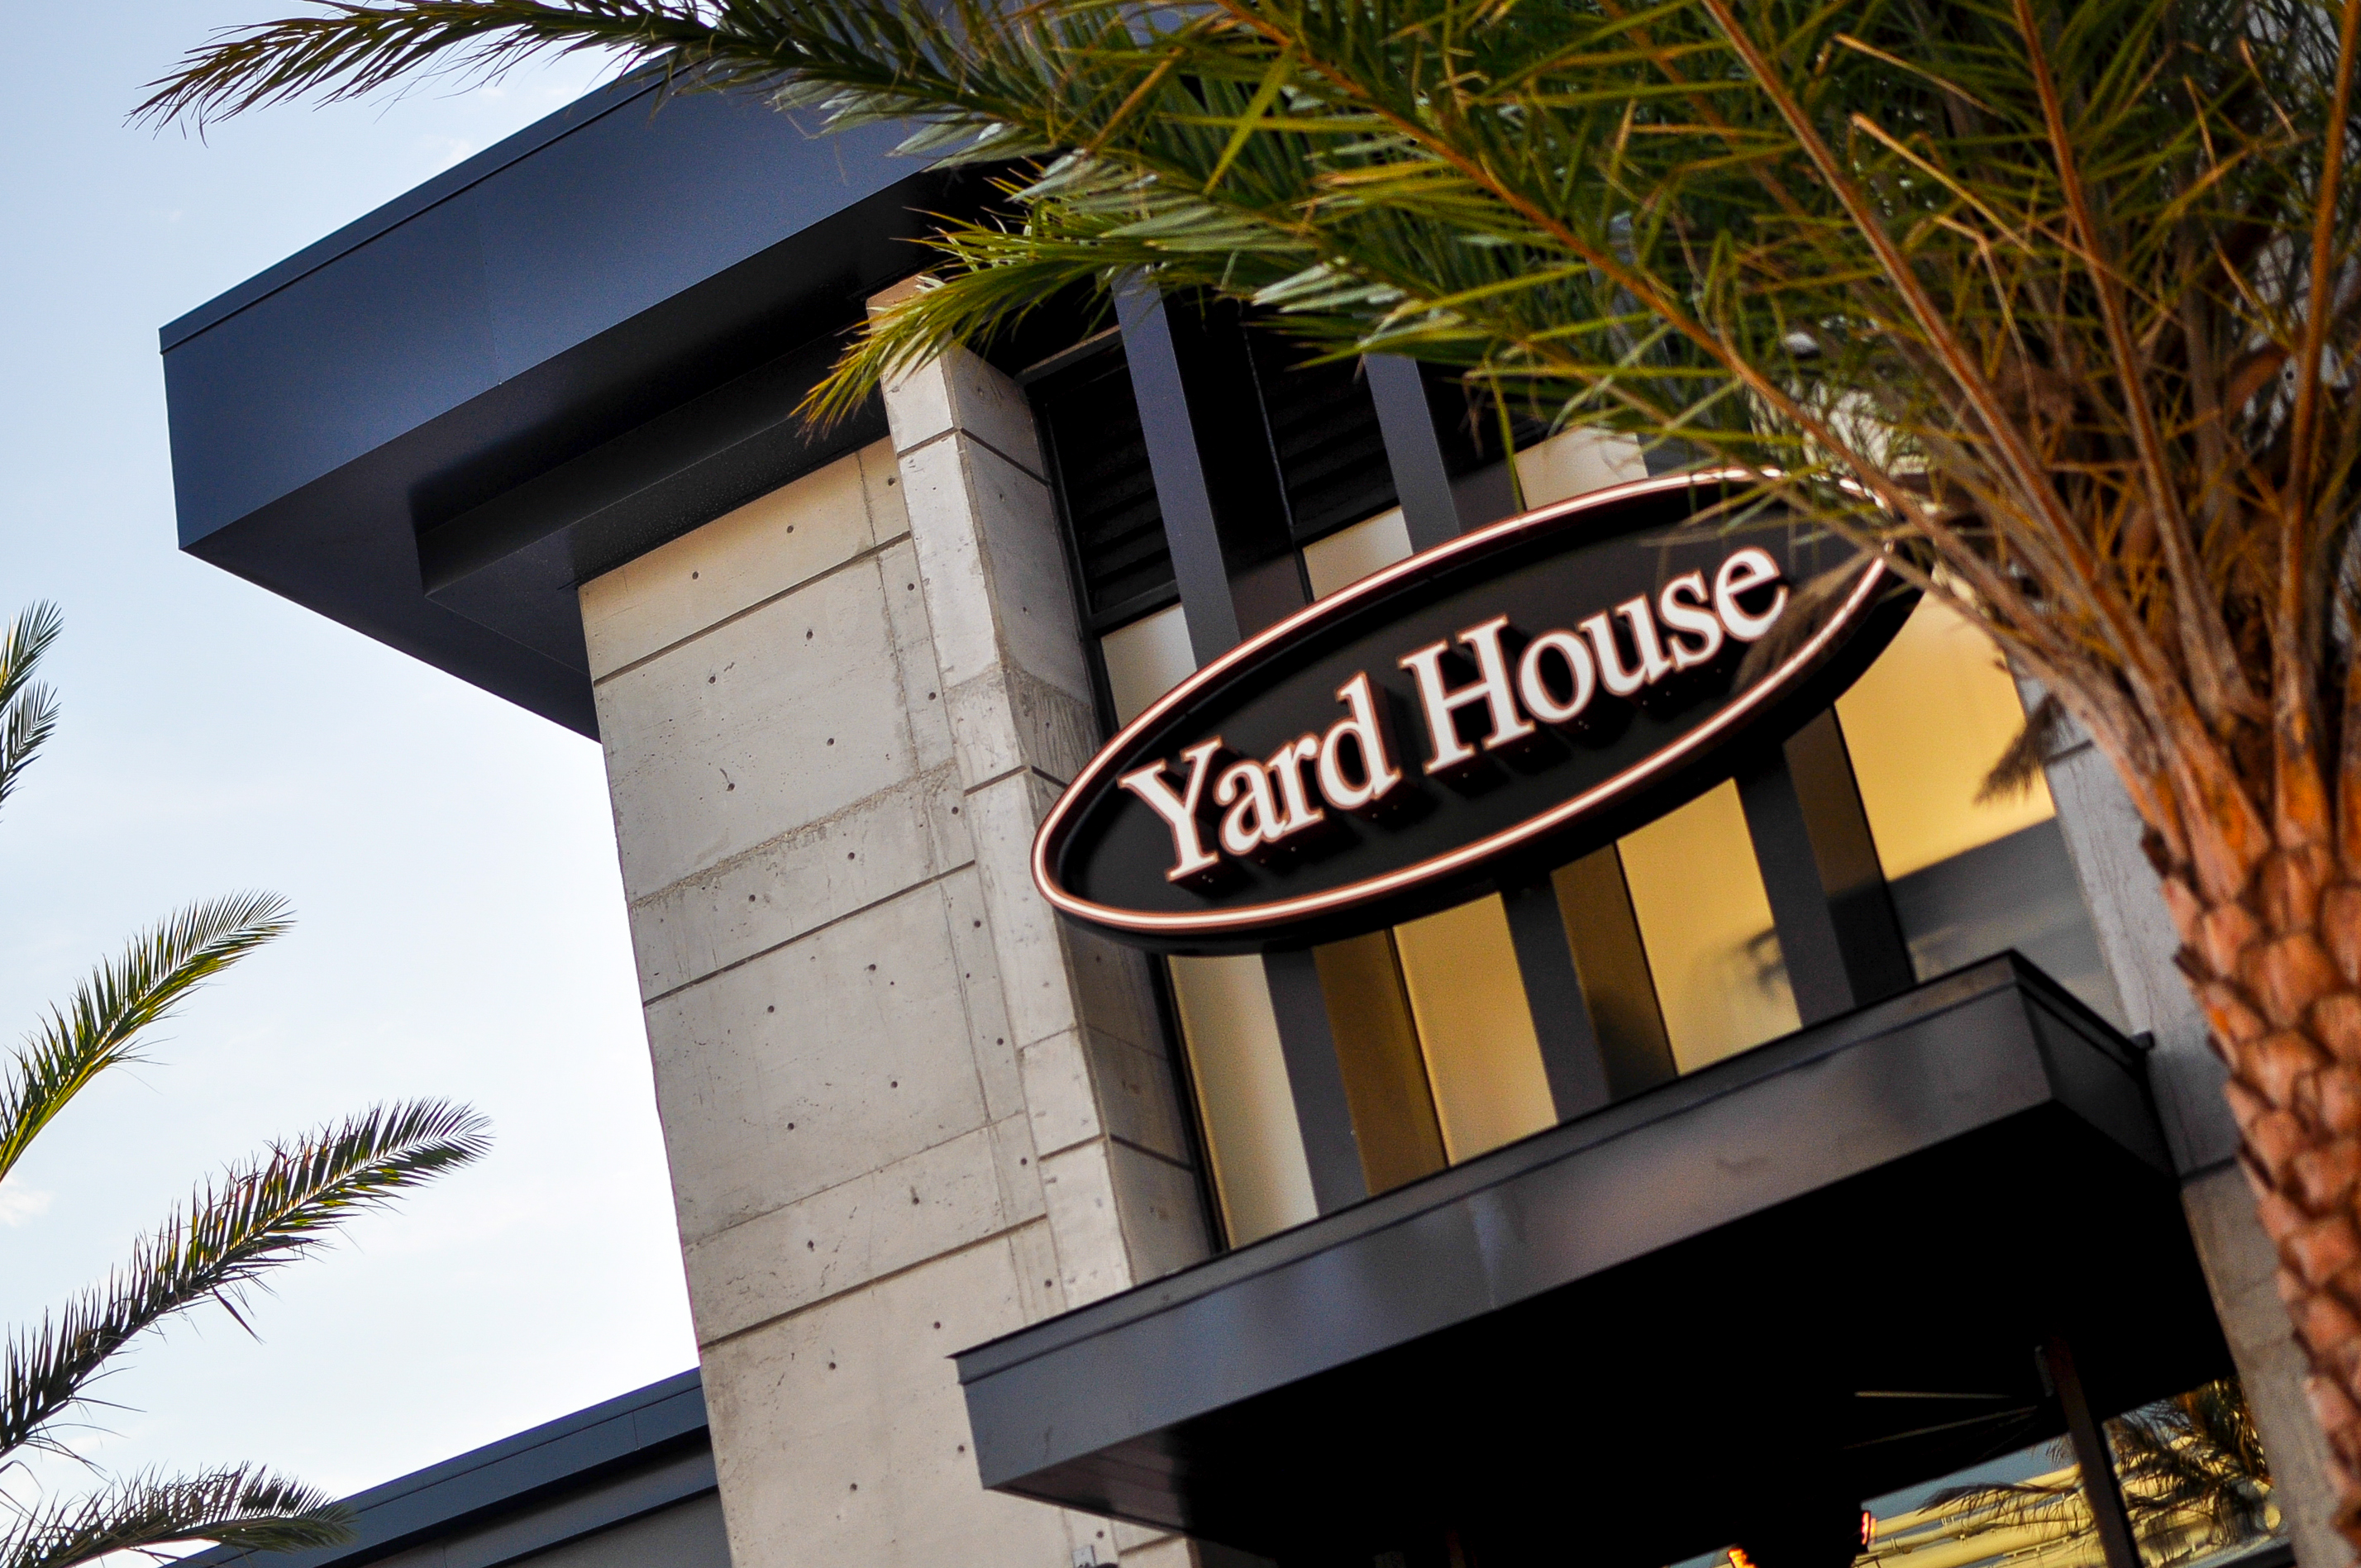 Yard House Preview Party – Now Open in Orlando